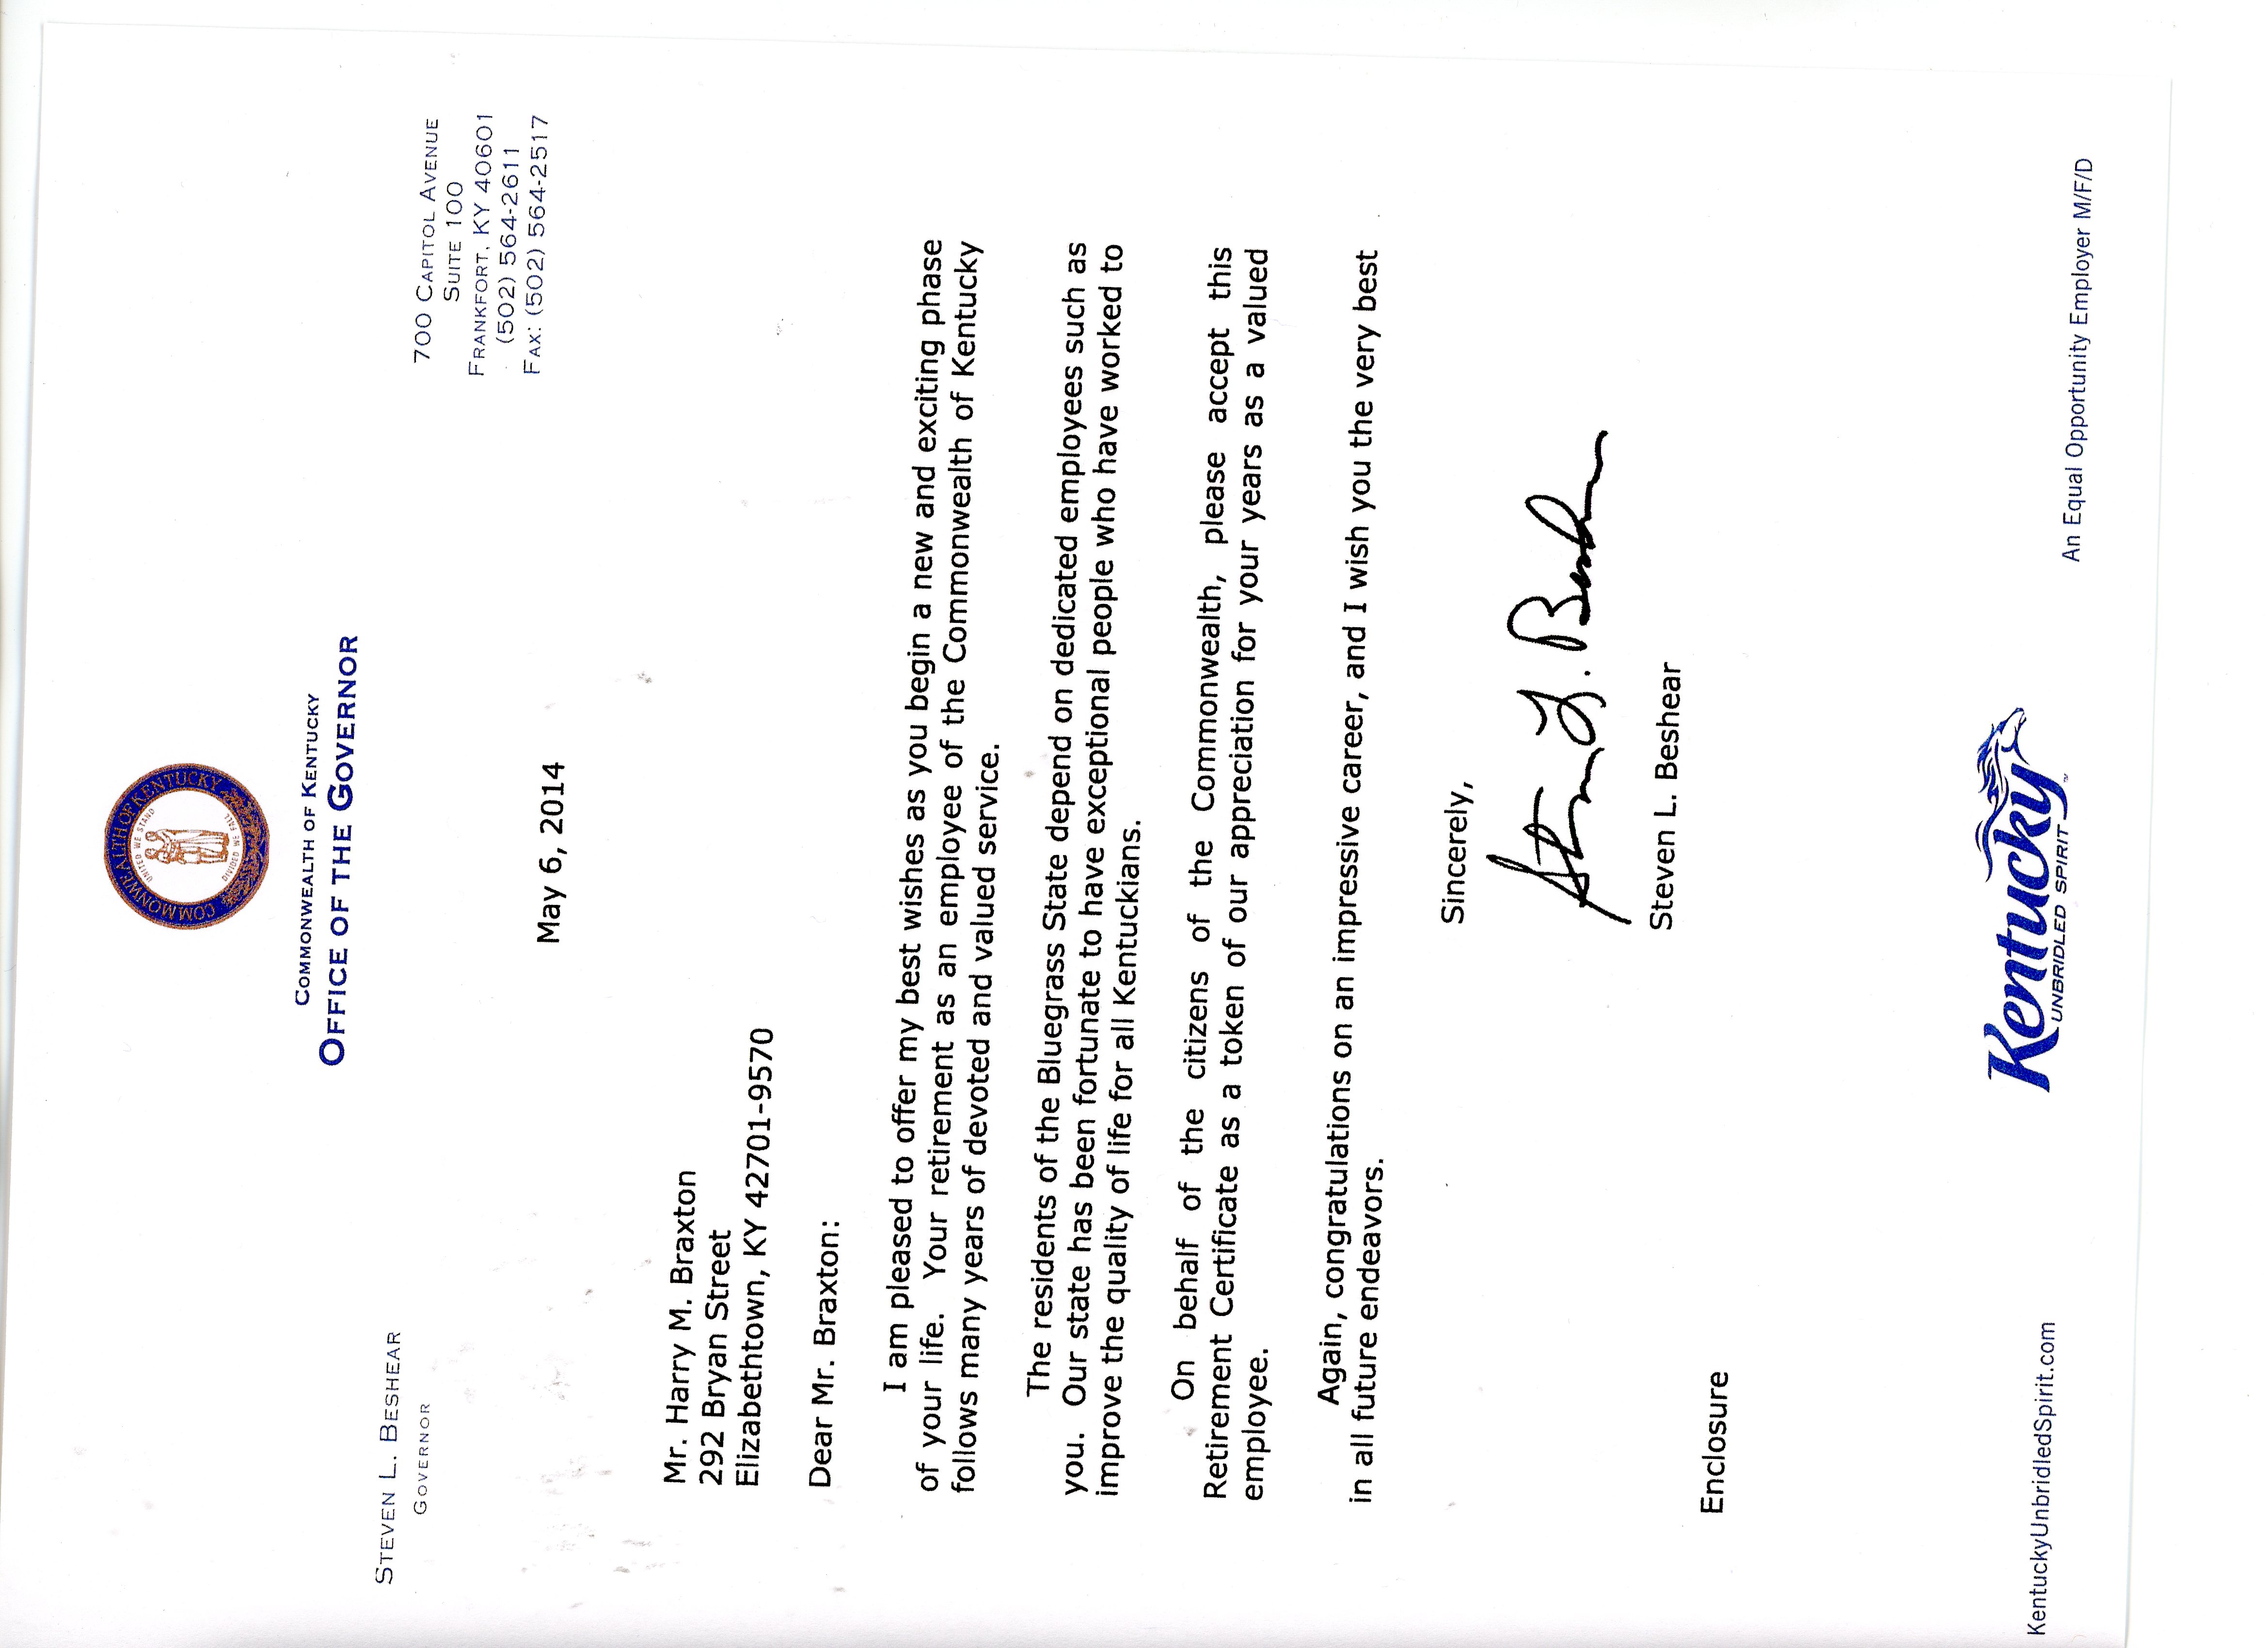 Governor's Letter